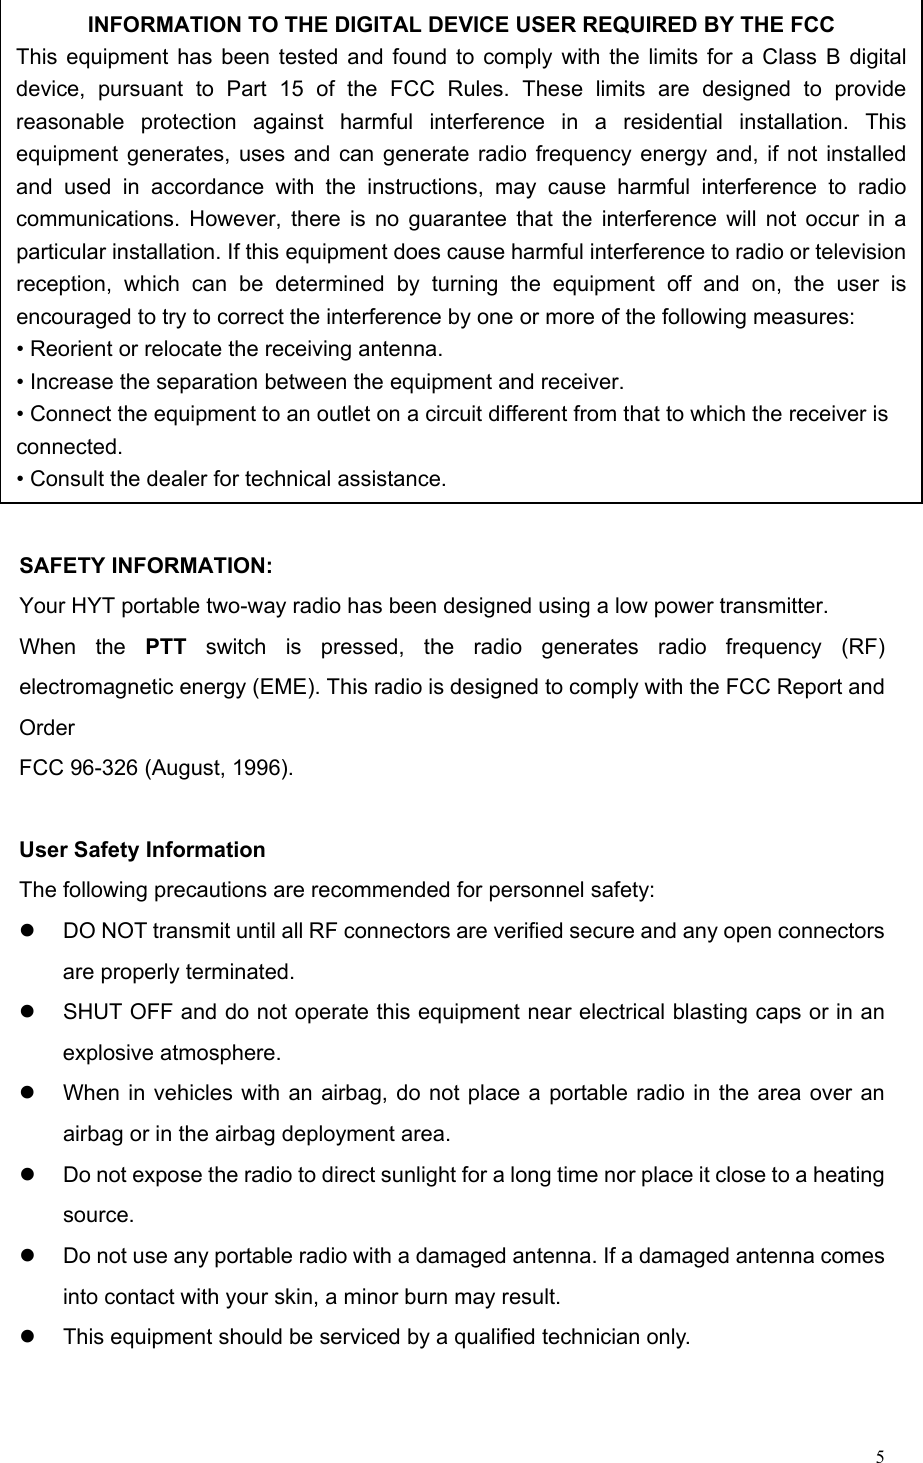   5 SAFETY INFORMATION: Your HYT portable two-way radio has been designed using a low power transmitter. When the PTT switch is pressed, the radio generates radio frequency (RF) electromagnetic energy (EME). This radio is designed to comply with the FCC Report and Order FCC 96-326 (August, 1996).  User Safety Information The following precautions are recommended for personnel safety: z  DO NOT transmit until all RF connectors are verified secure and any open connectors are properly terminated. z  SHUT OFF and do not operate this equipment near electrical blasting caps or in an explosive atmosphere. z  When in vehicles with an airbag, do not place a portable radio in the area over an airbag or in the airbag deployment area. z  Do not expose the radio to direct sunlight for a long time nor place it close to a heating source. z  Do not use any portable radio with a damaged antenna. If a damaged antenna comes into contact with your skin, a minor burn may result. z  This equipment should be serviced by a qualified technician only.    INFORMATION TO THE DIGITAL DEVICE USER REQUIRED BY THE FCC This equipment has been tested and found to comply with the limits for a Class B digital device, pursuant to Part 15 of the FCC Rules. These limits are designed to provide reasonable protection against harmful interference in a residential installation. This equipment generates, uses and can generate radio frequency energy and, if not installed and used in accordance with the instructions, may cause harmful interference to radio communications. However, there is no guarantee that the interference will not occur in a particular installation. If this equipment does cause harmful interference to radio or television reception, which can be determined by turning the equipment off and on, the user is encouraged to try to correct the interference by one or more of the following measures: • Reorient or relocate the receiving antenna. • Increase the separation between the equipment and receiver. • Connect the equipment to an outlet on a circuit different from that to which the receiver is connected. • Consult the dealer for technical assistance. 